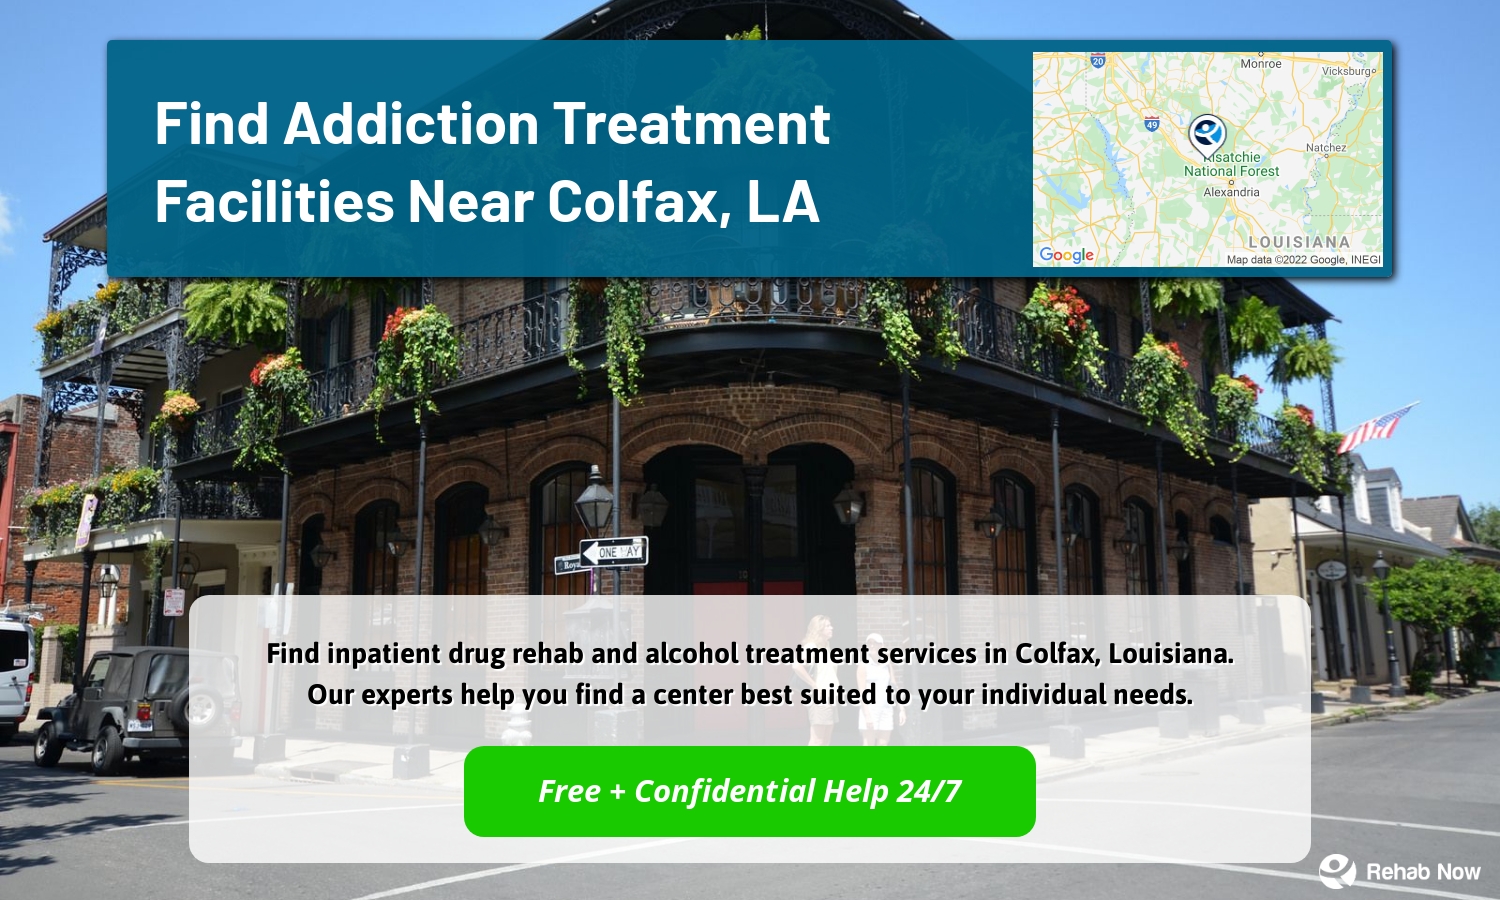 Find inpatient drug rehab and alcohol treatment services in Colfax, Louisiana. Our experts help you find a center best suited to your individual needs.